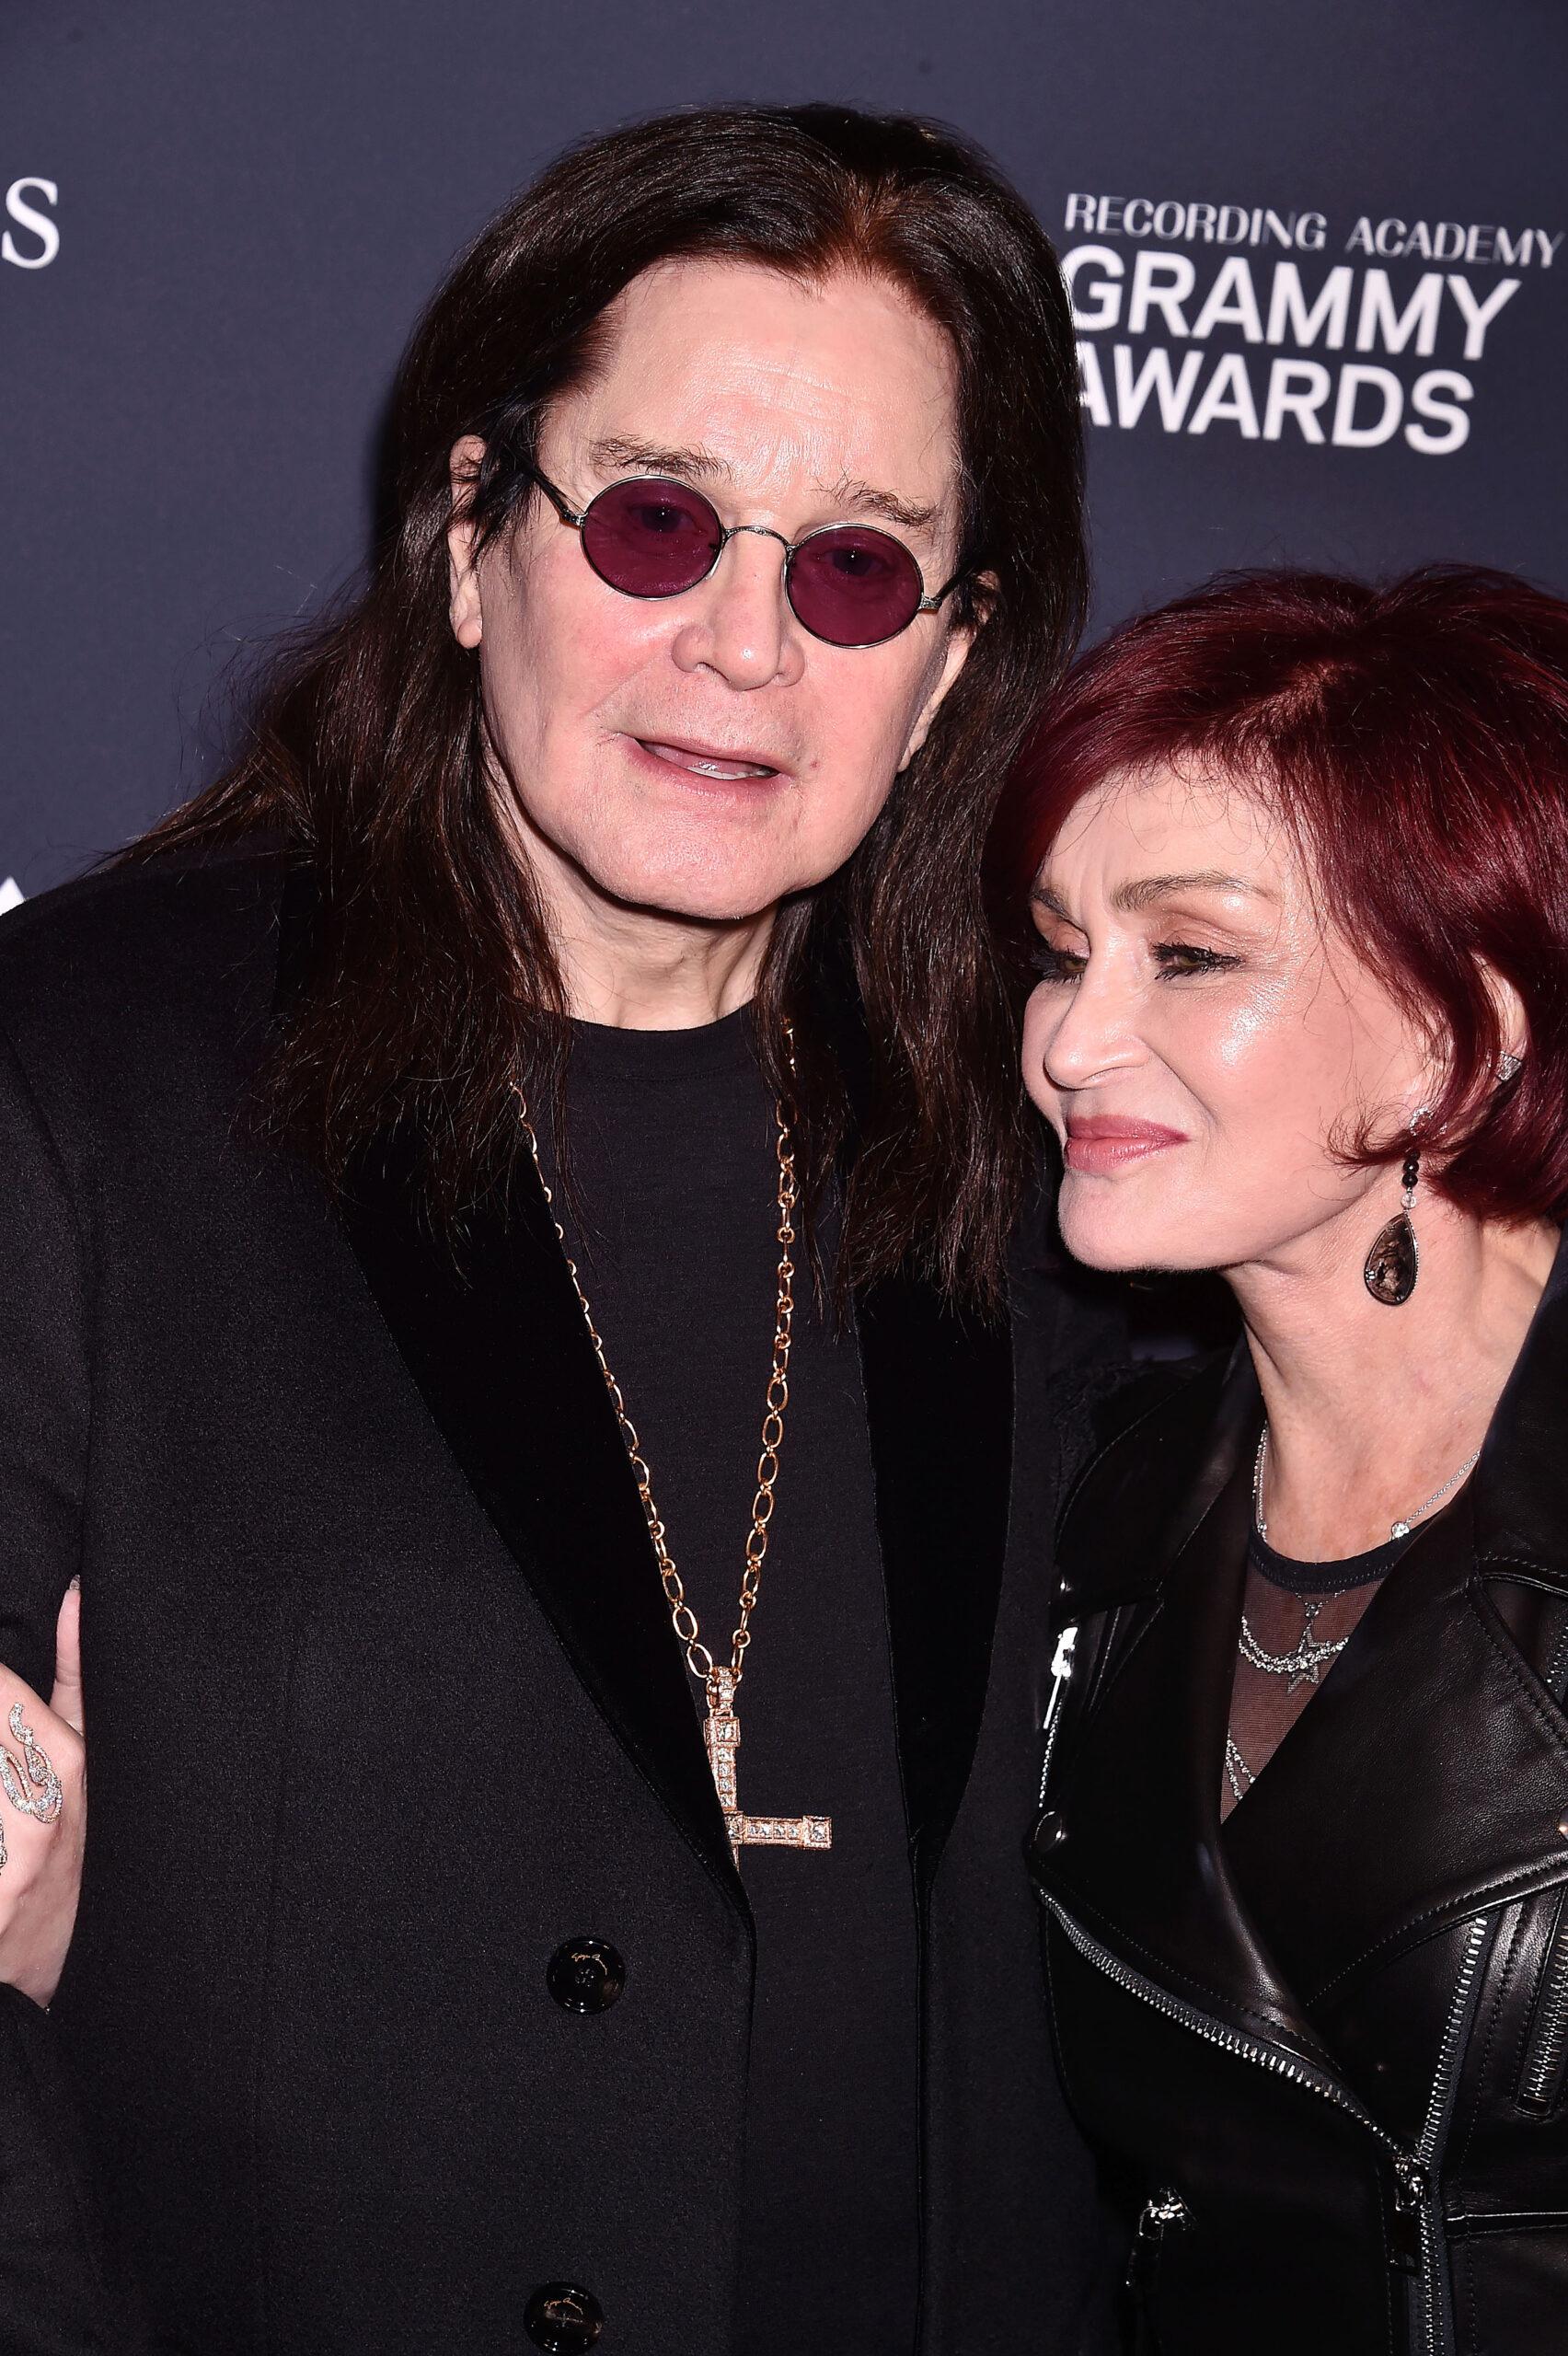 Ozzy Osborne & Sharon Osbourne at The Pre-Grammy Gala and Grammy Salute to Industry Icons Honoring Sean "Diddy" Combs